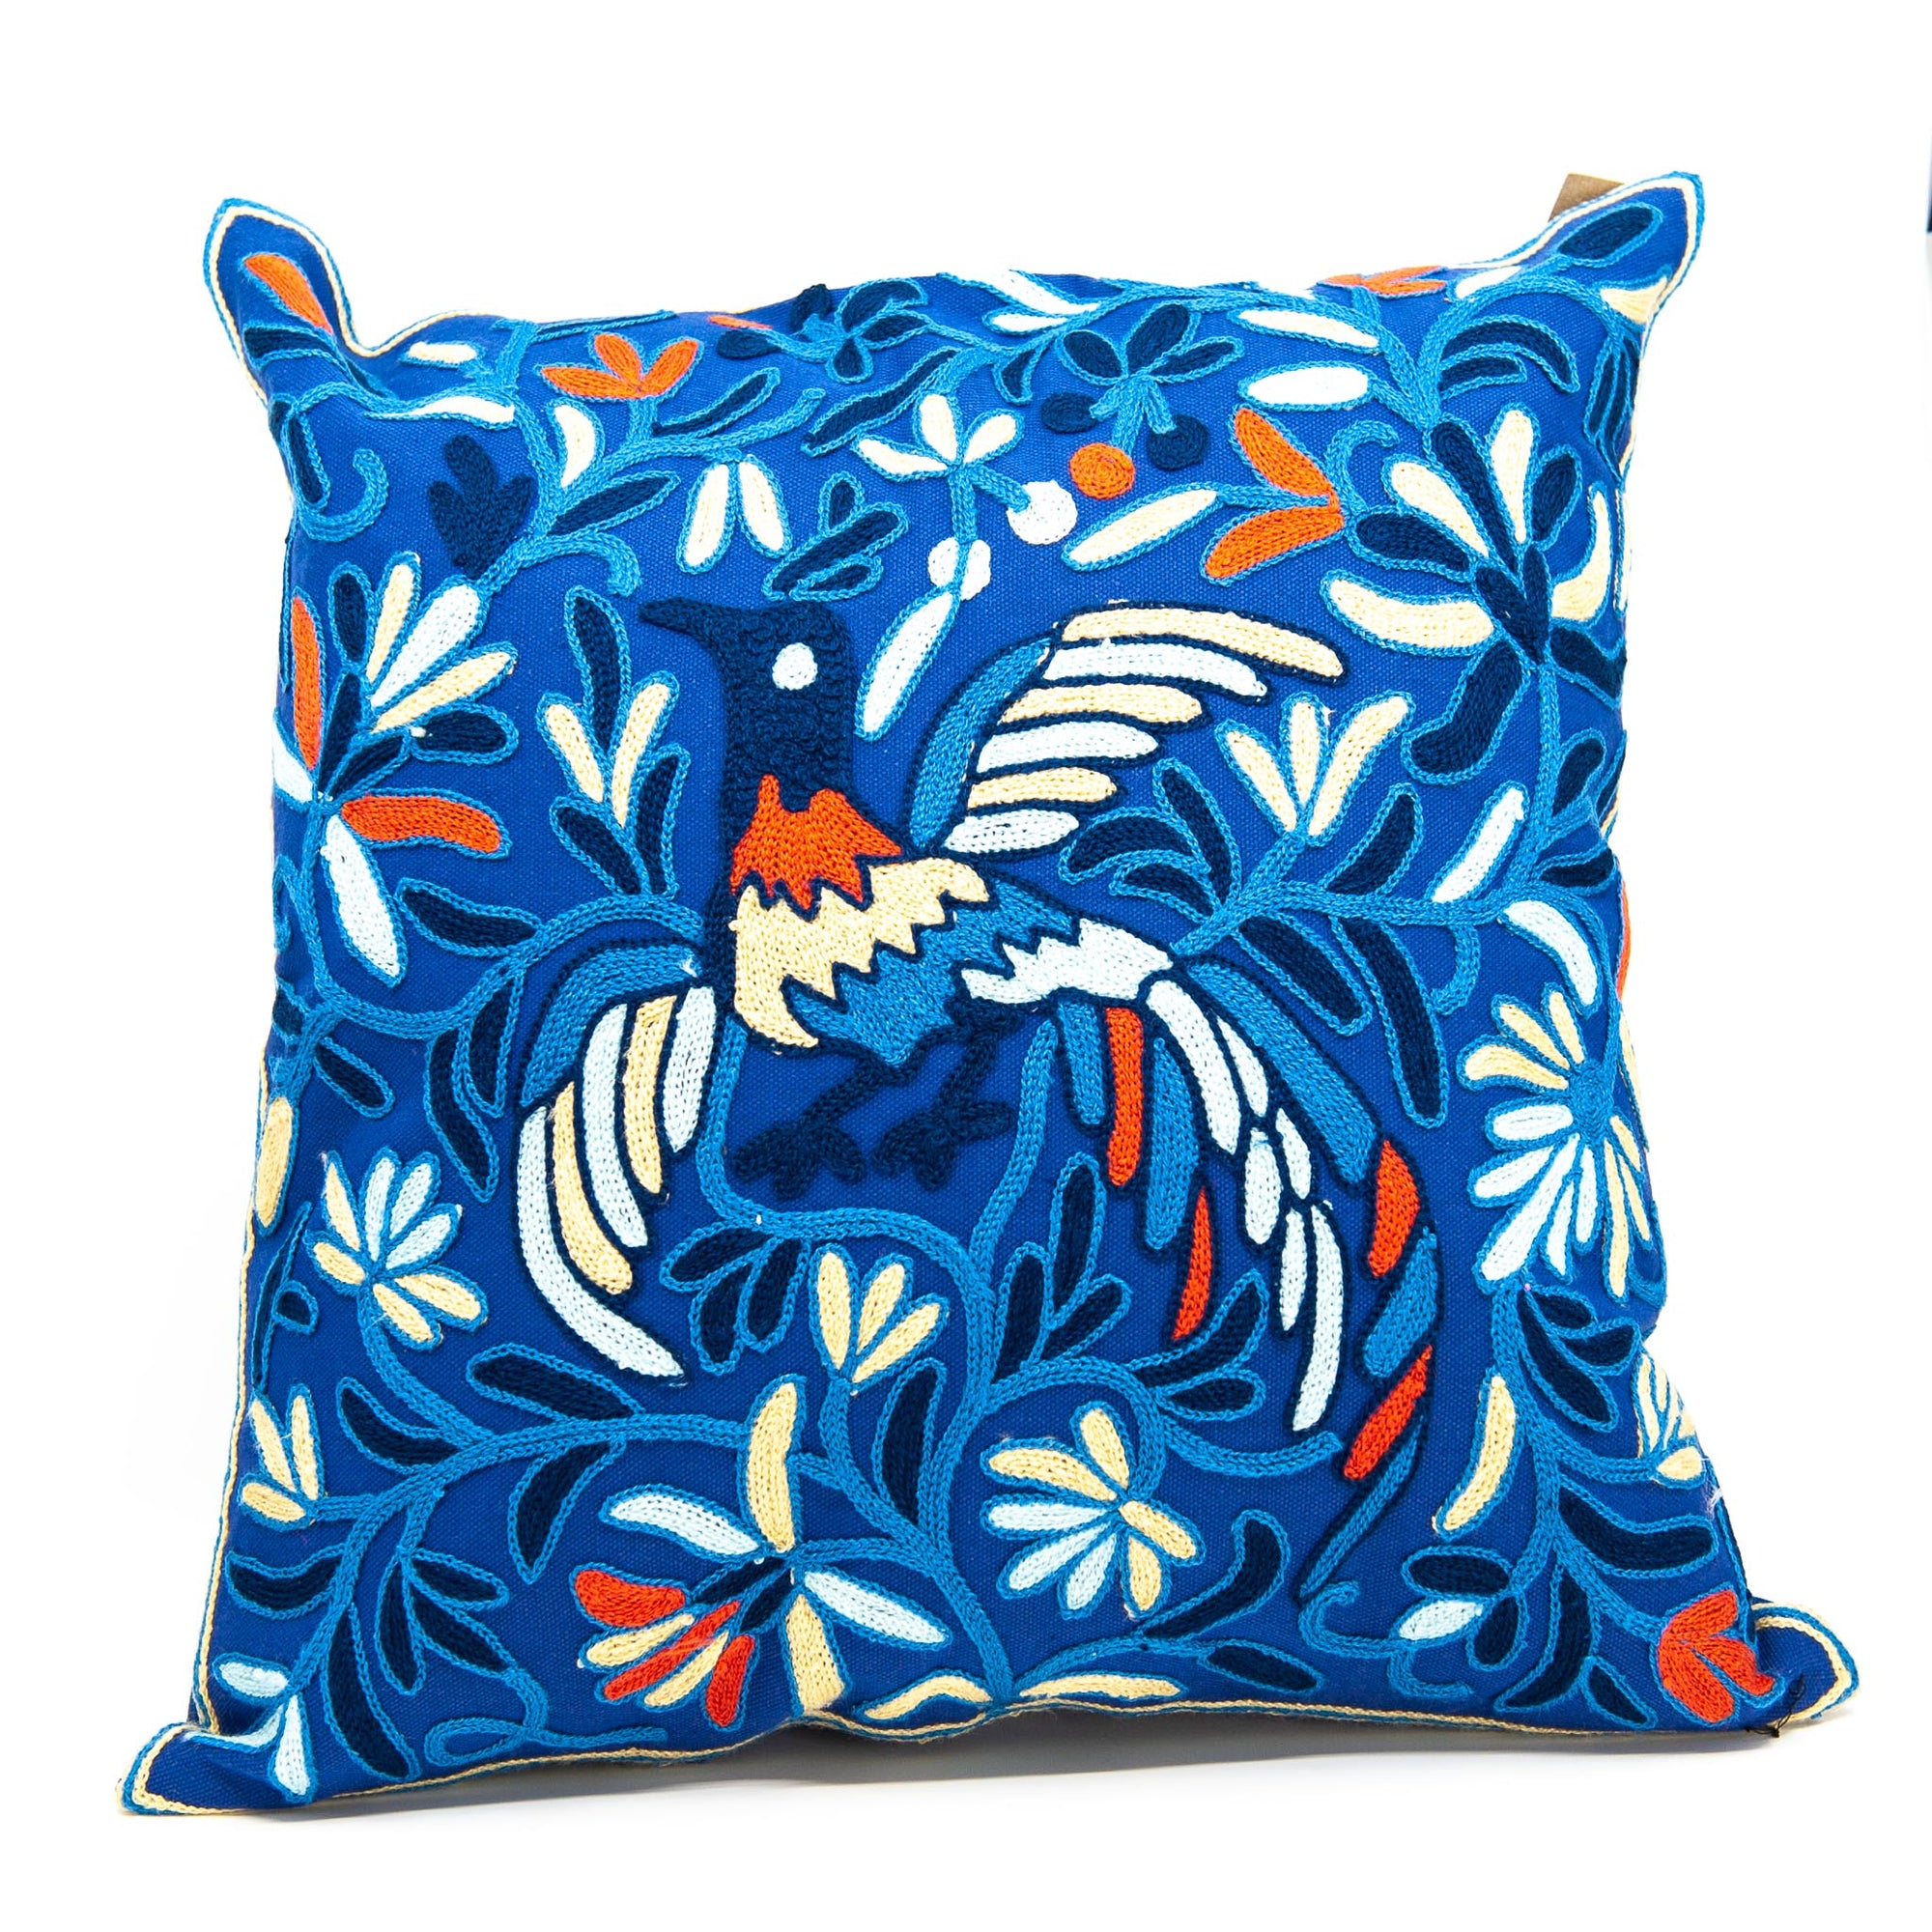 Embroidered Pillow Cover - Blue Bird